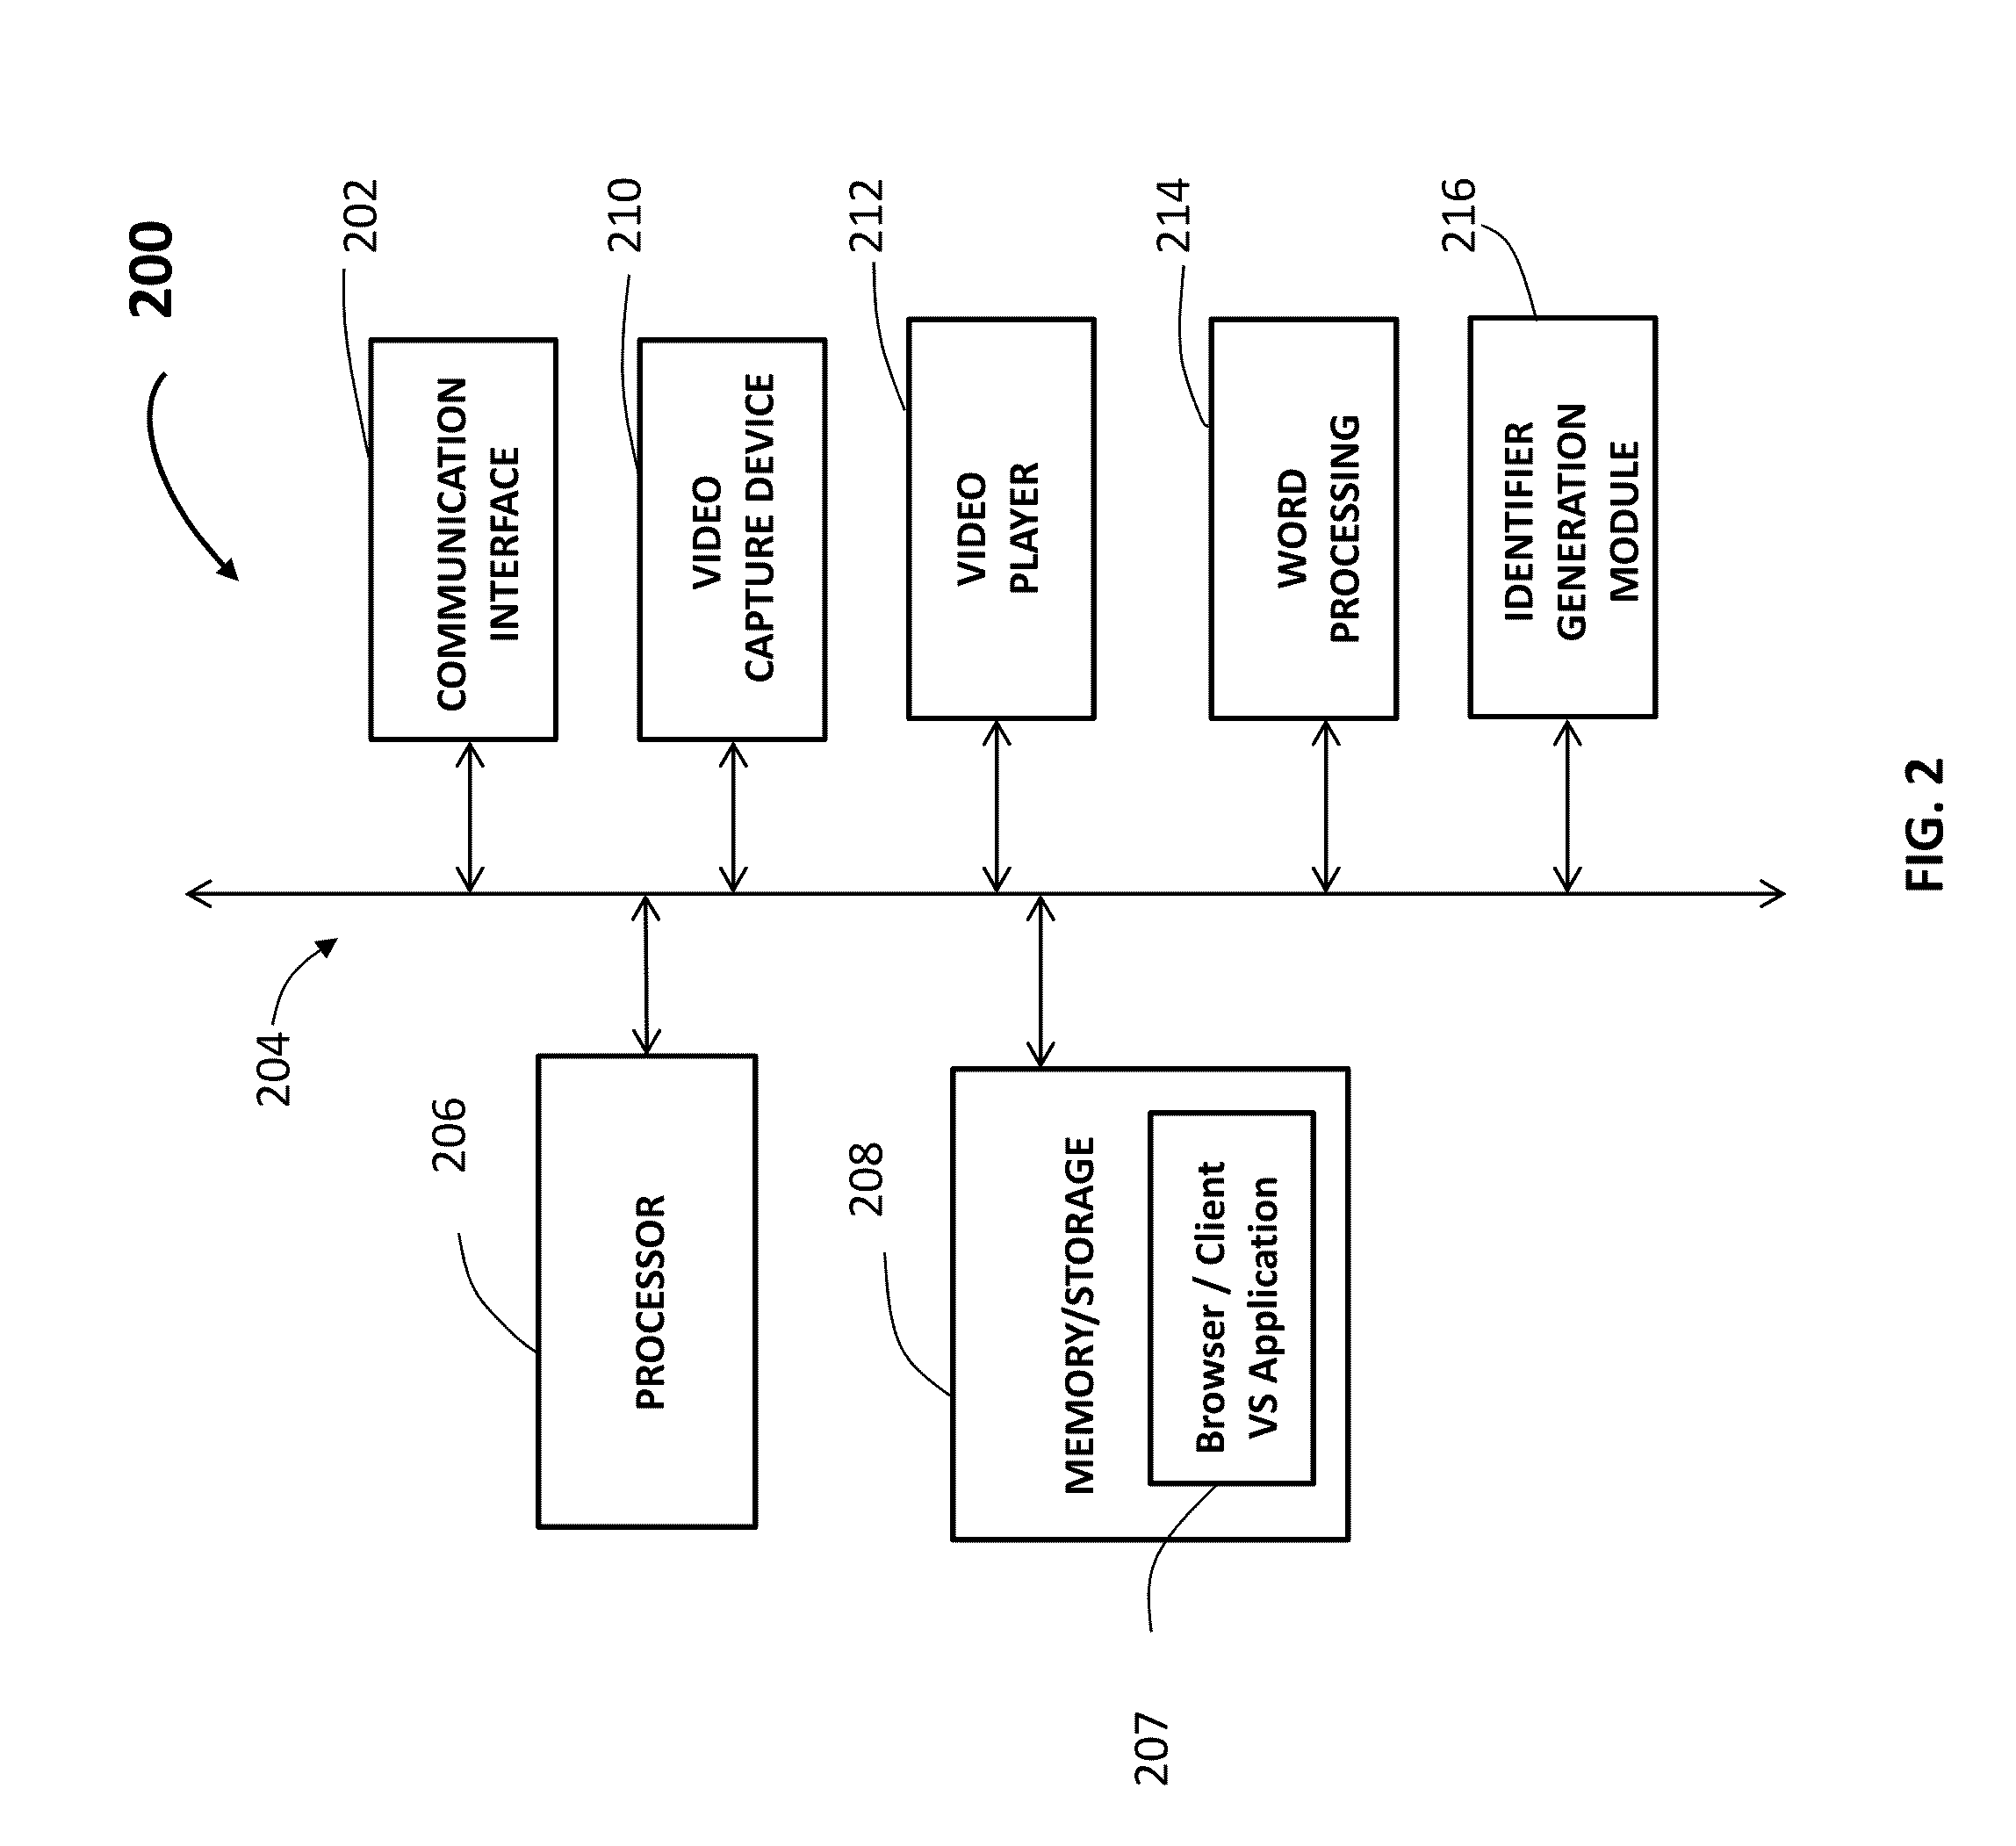 Video signature system and method